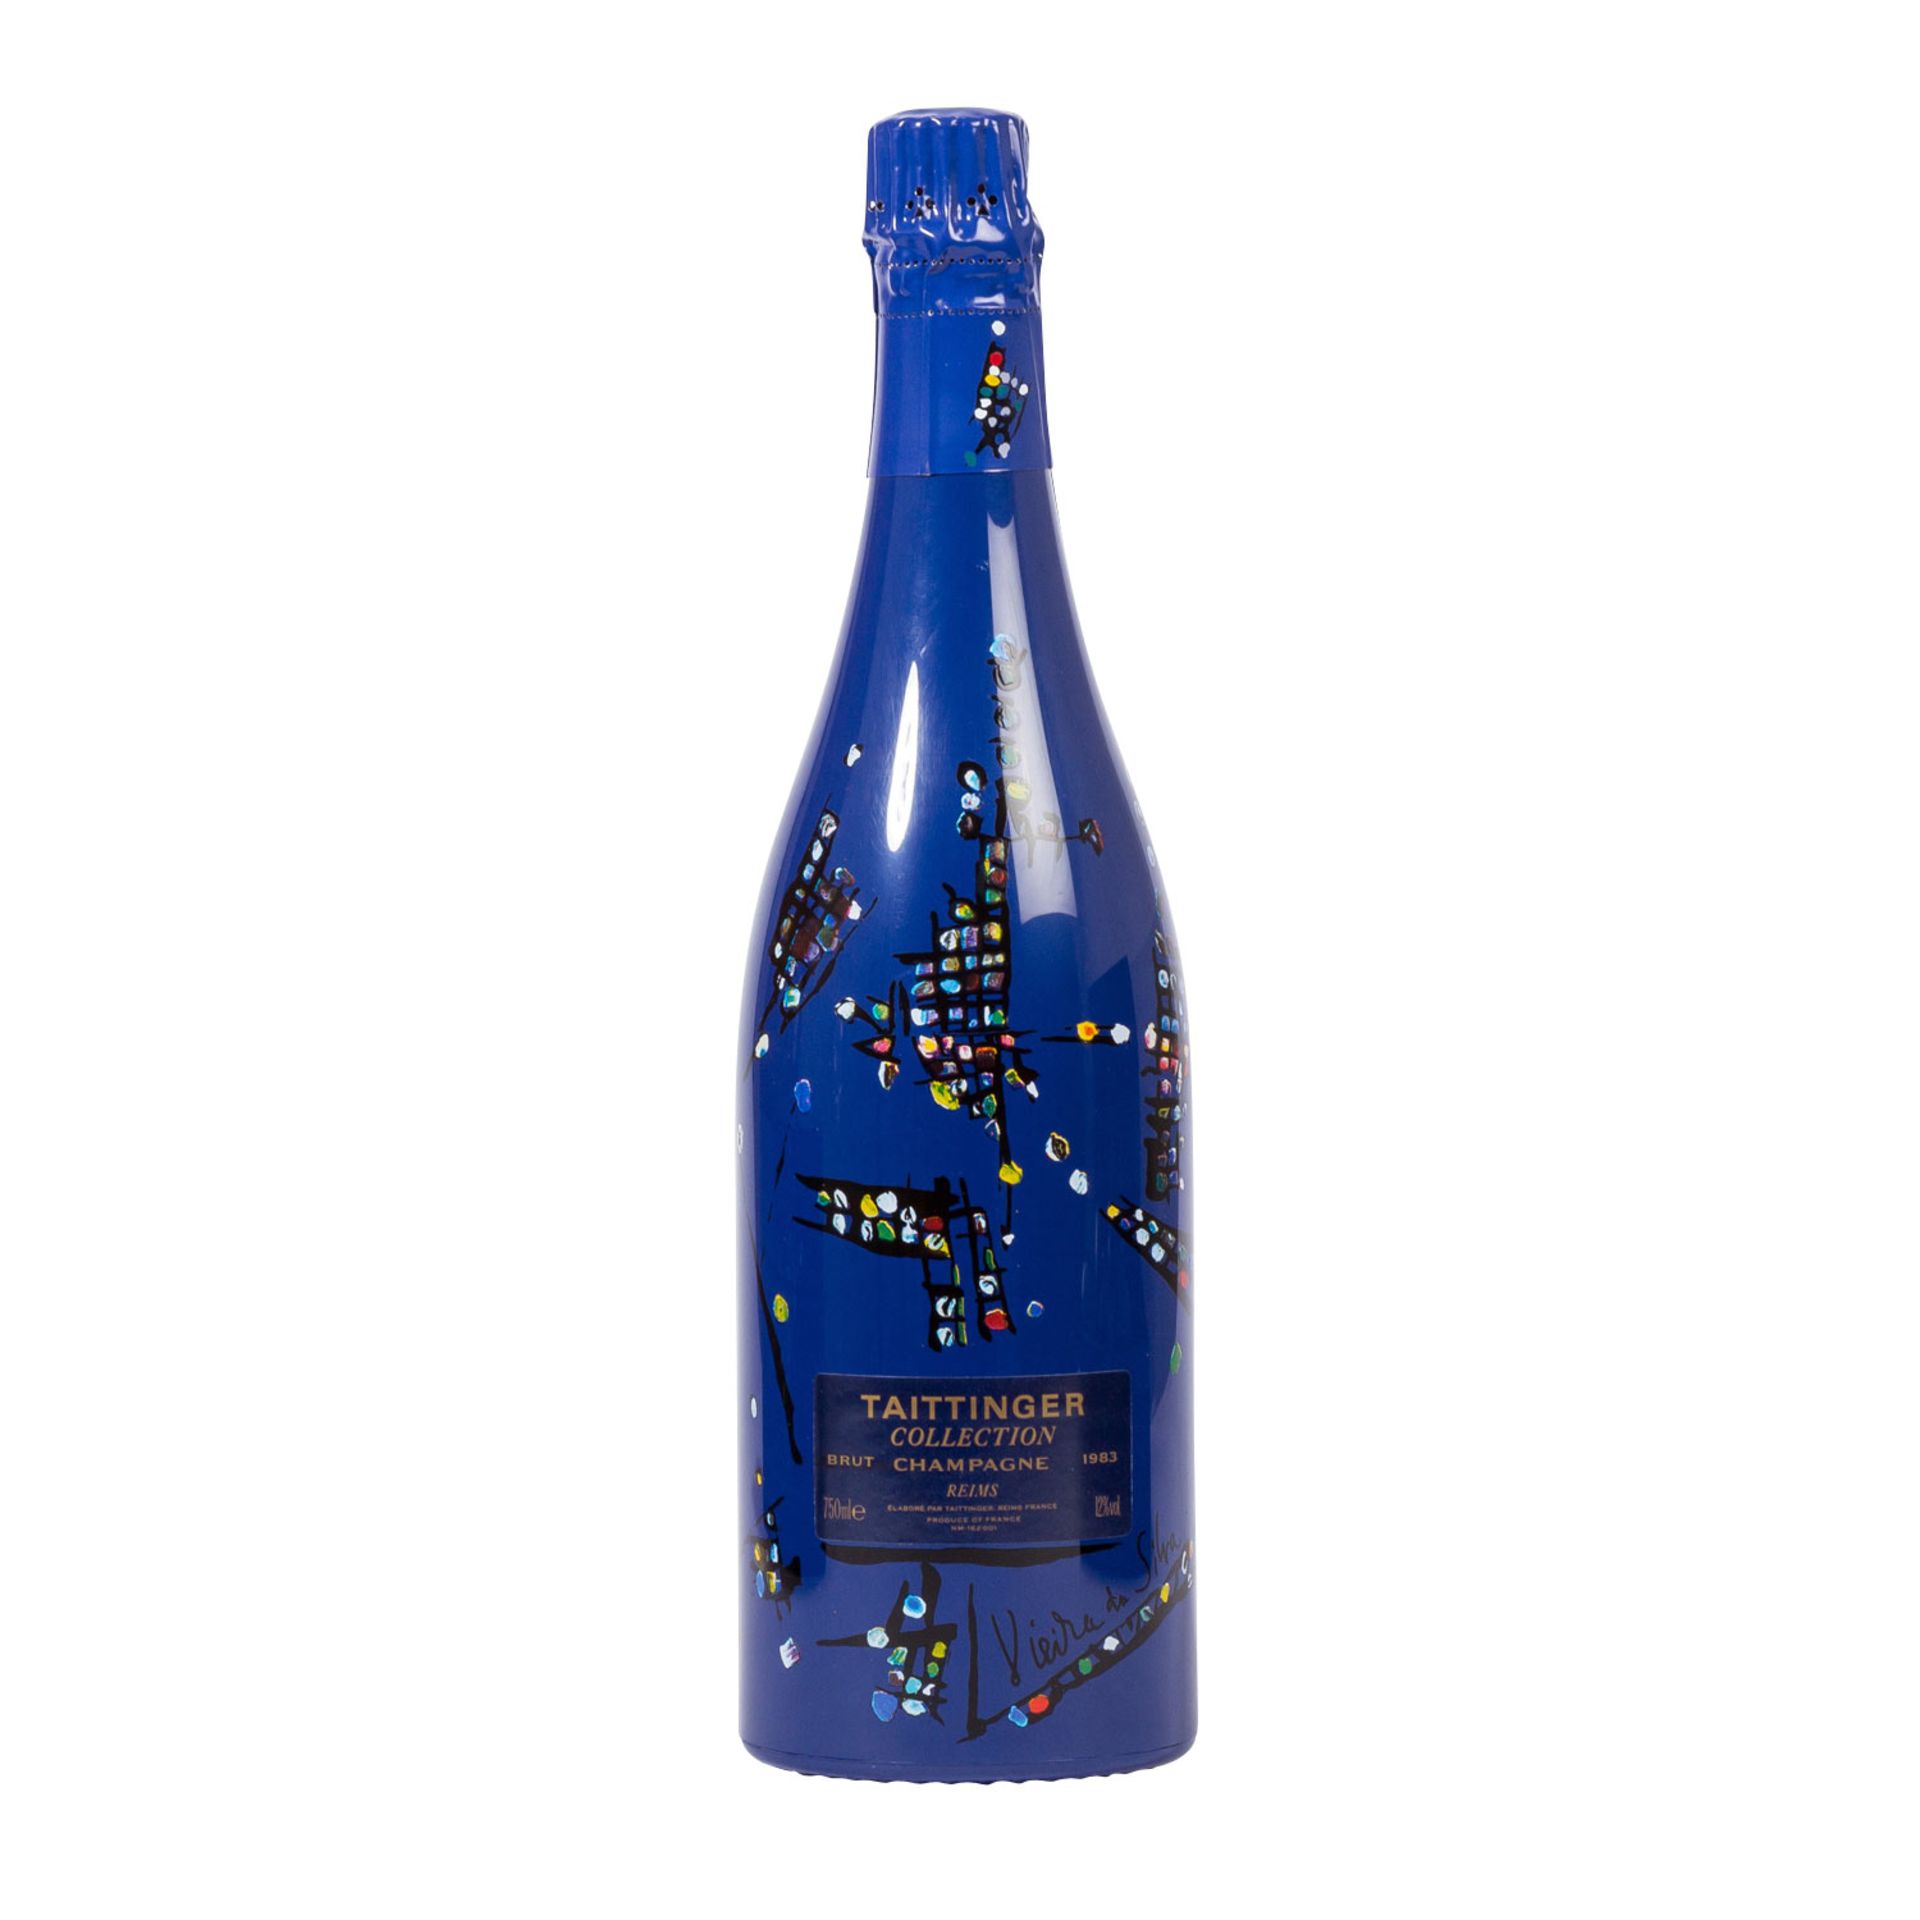 TAITTINGER Champagner 'Collection' 1 Flasche 'Corneille' 1990 - Image 2 of 5